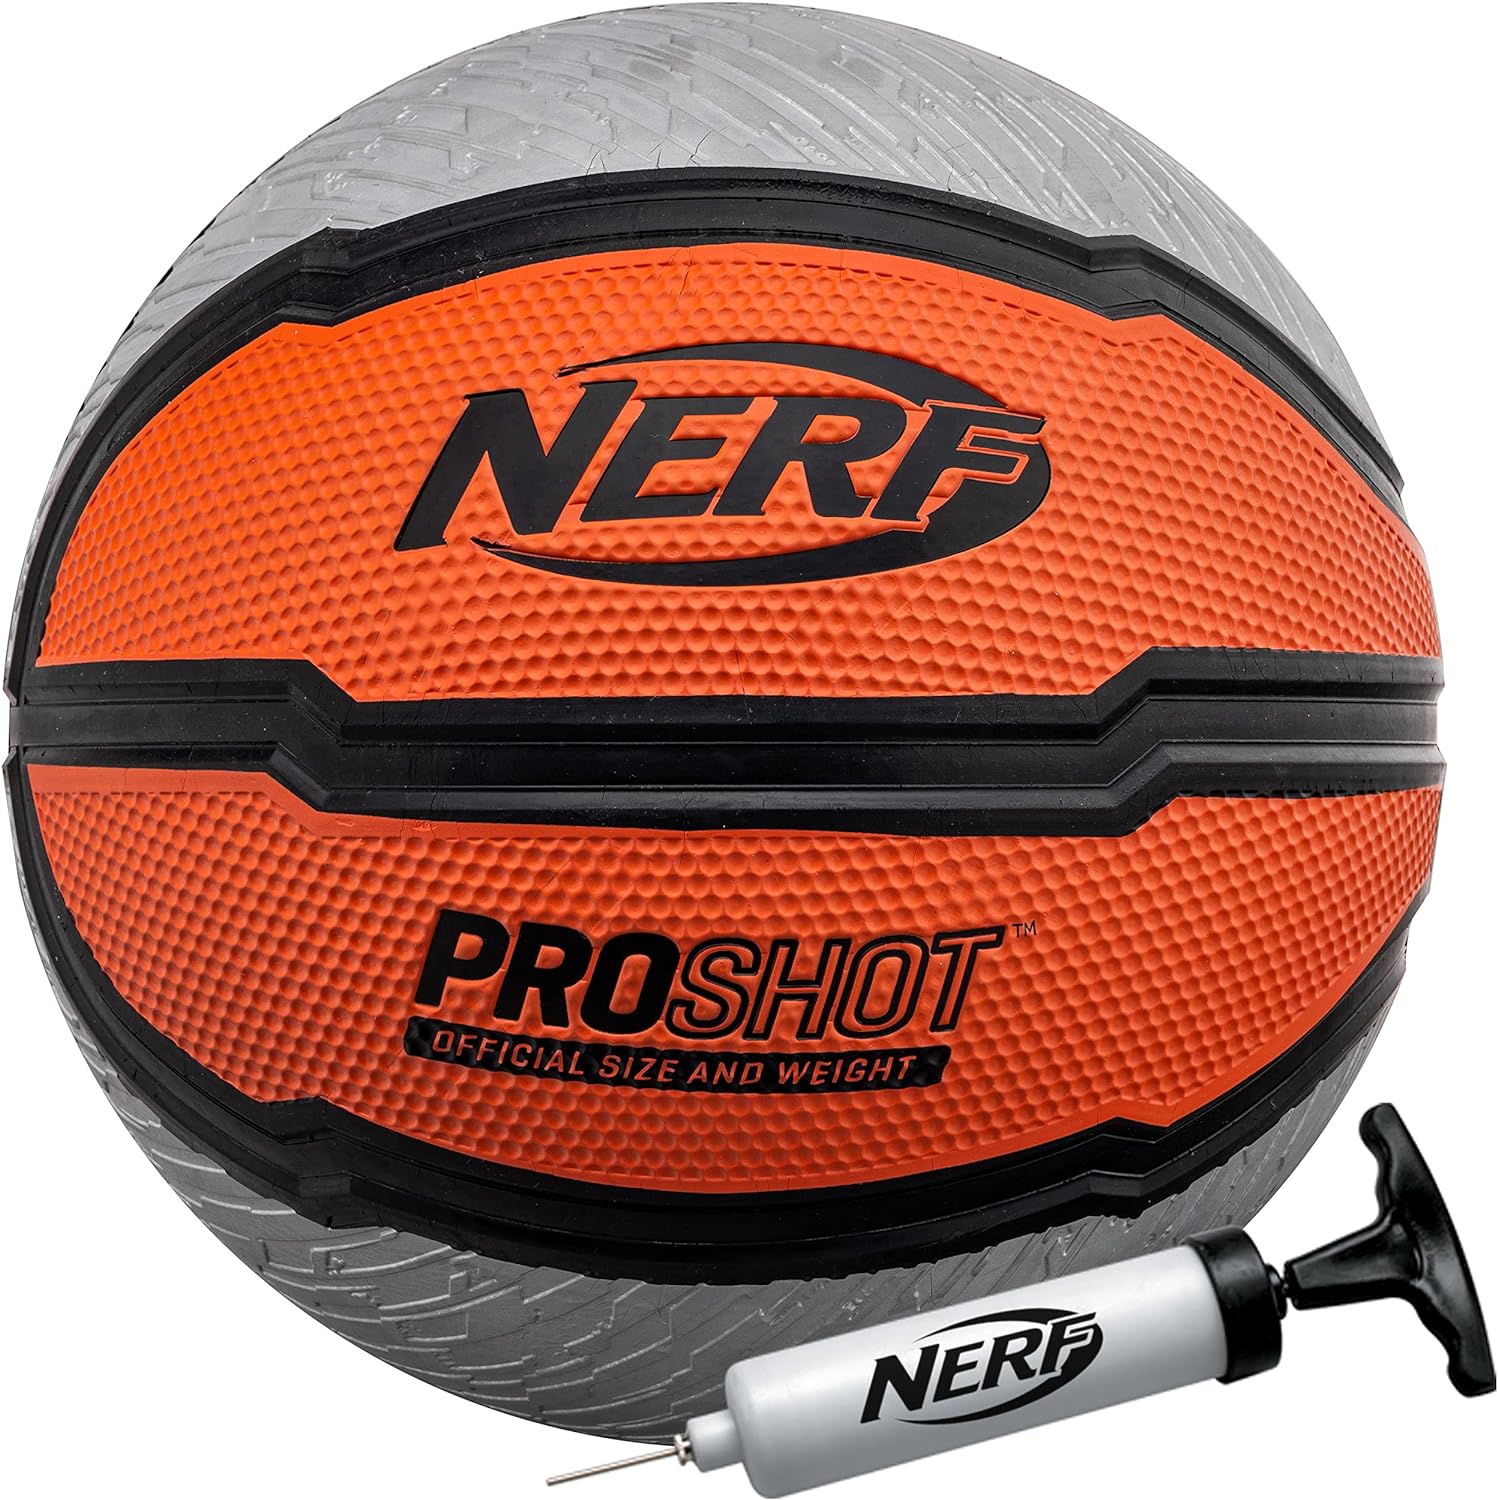 This is a fine basket ball with a acceptable bounce and excellent grip. But it is not soft or 'nerfy' in anyway whatsoever. It' just as solid as any other basketball and will hurt a student just as much if they get beamed in the head with it. In other words.....it' just a normal basketball with the name 'Nerf' on it. If you want to go 'all nerf' in your athletics equipment go for it. But you can probably find one just as good (or better) for the same price with just as much pain involved when 